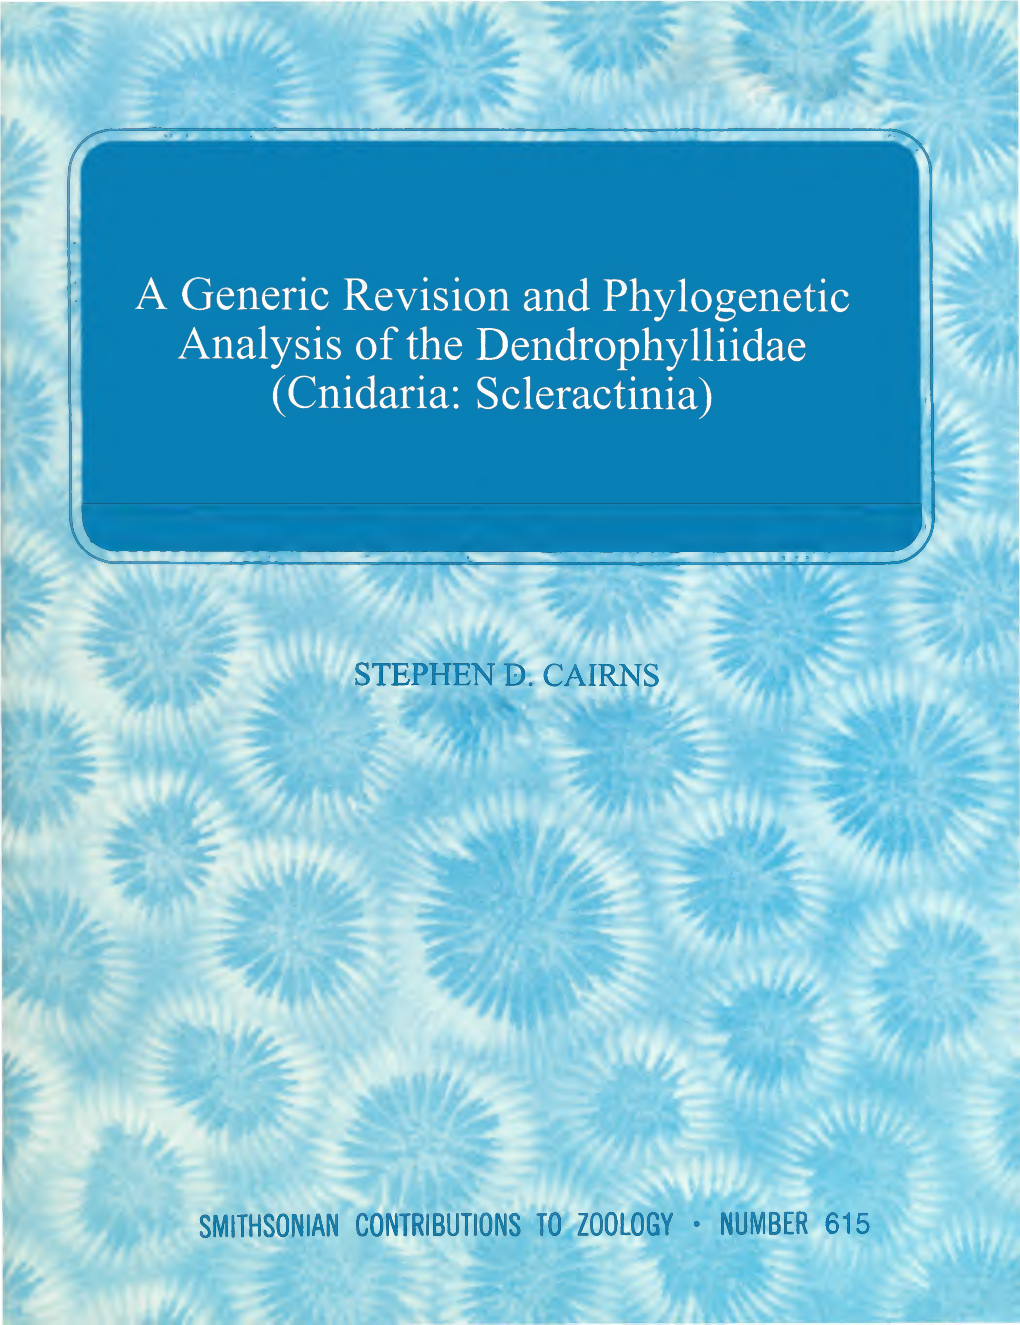 A Generic Revision and Phylogenetic Analysis of the Dendrophylliidae (Cnidaria: Scleractinia)